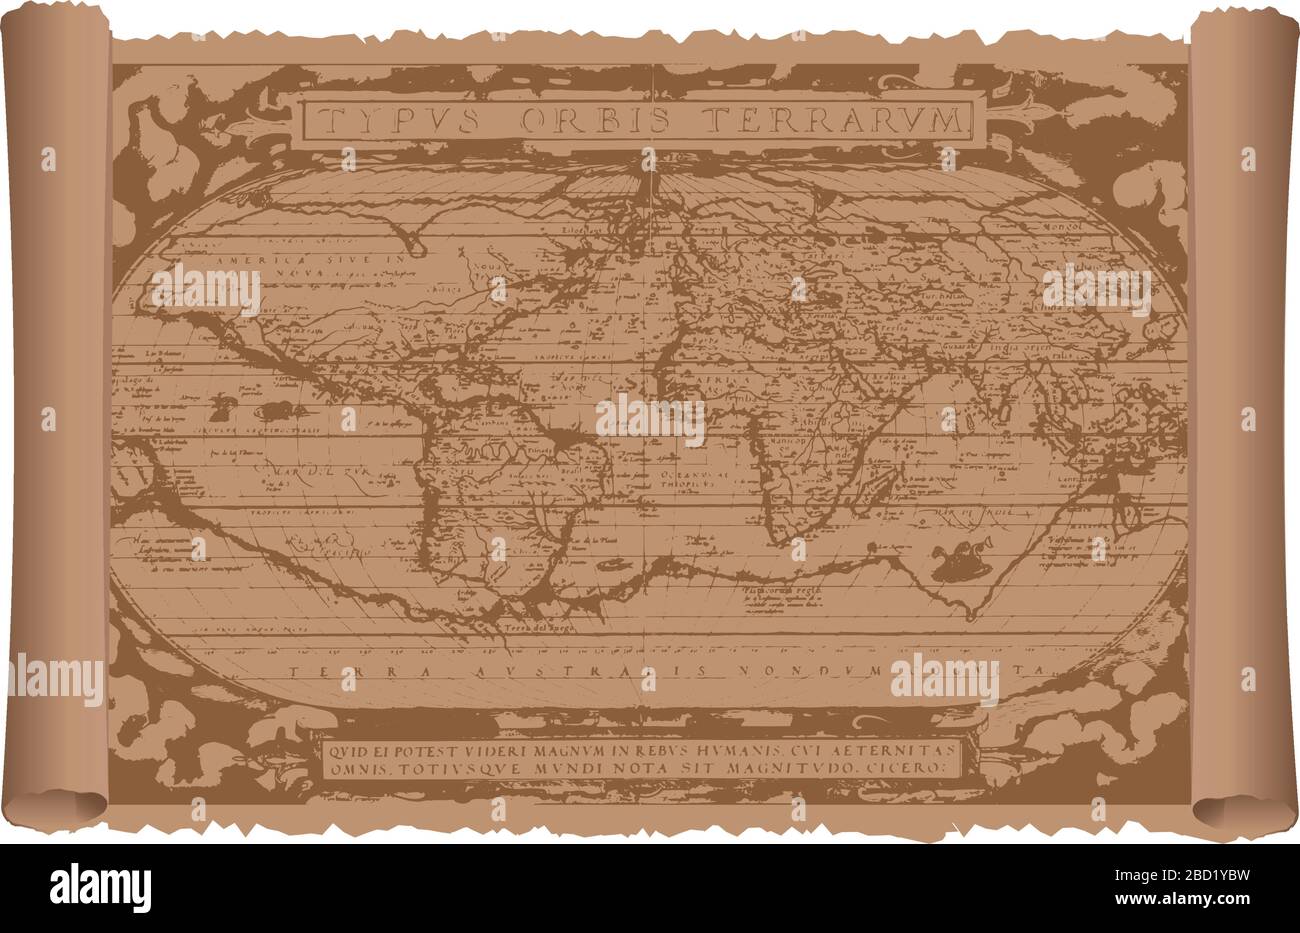 Old world map on the vintage scroll paper. flat vector illustration. Stock Vector